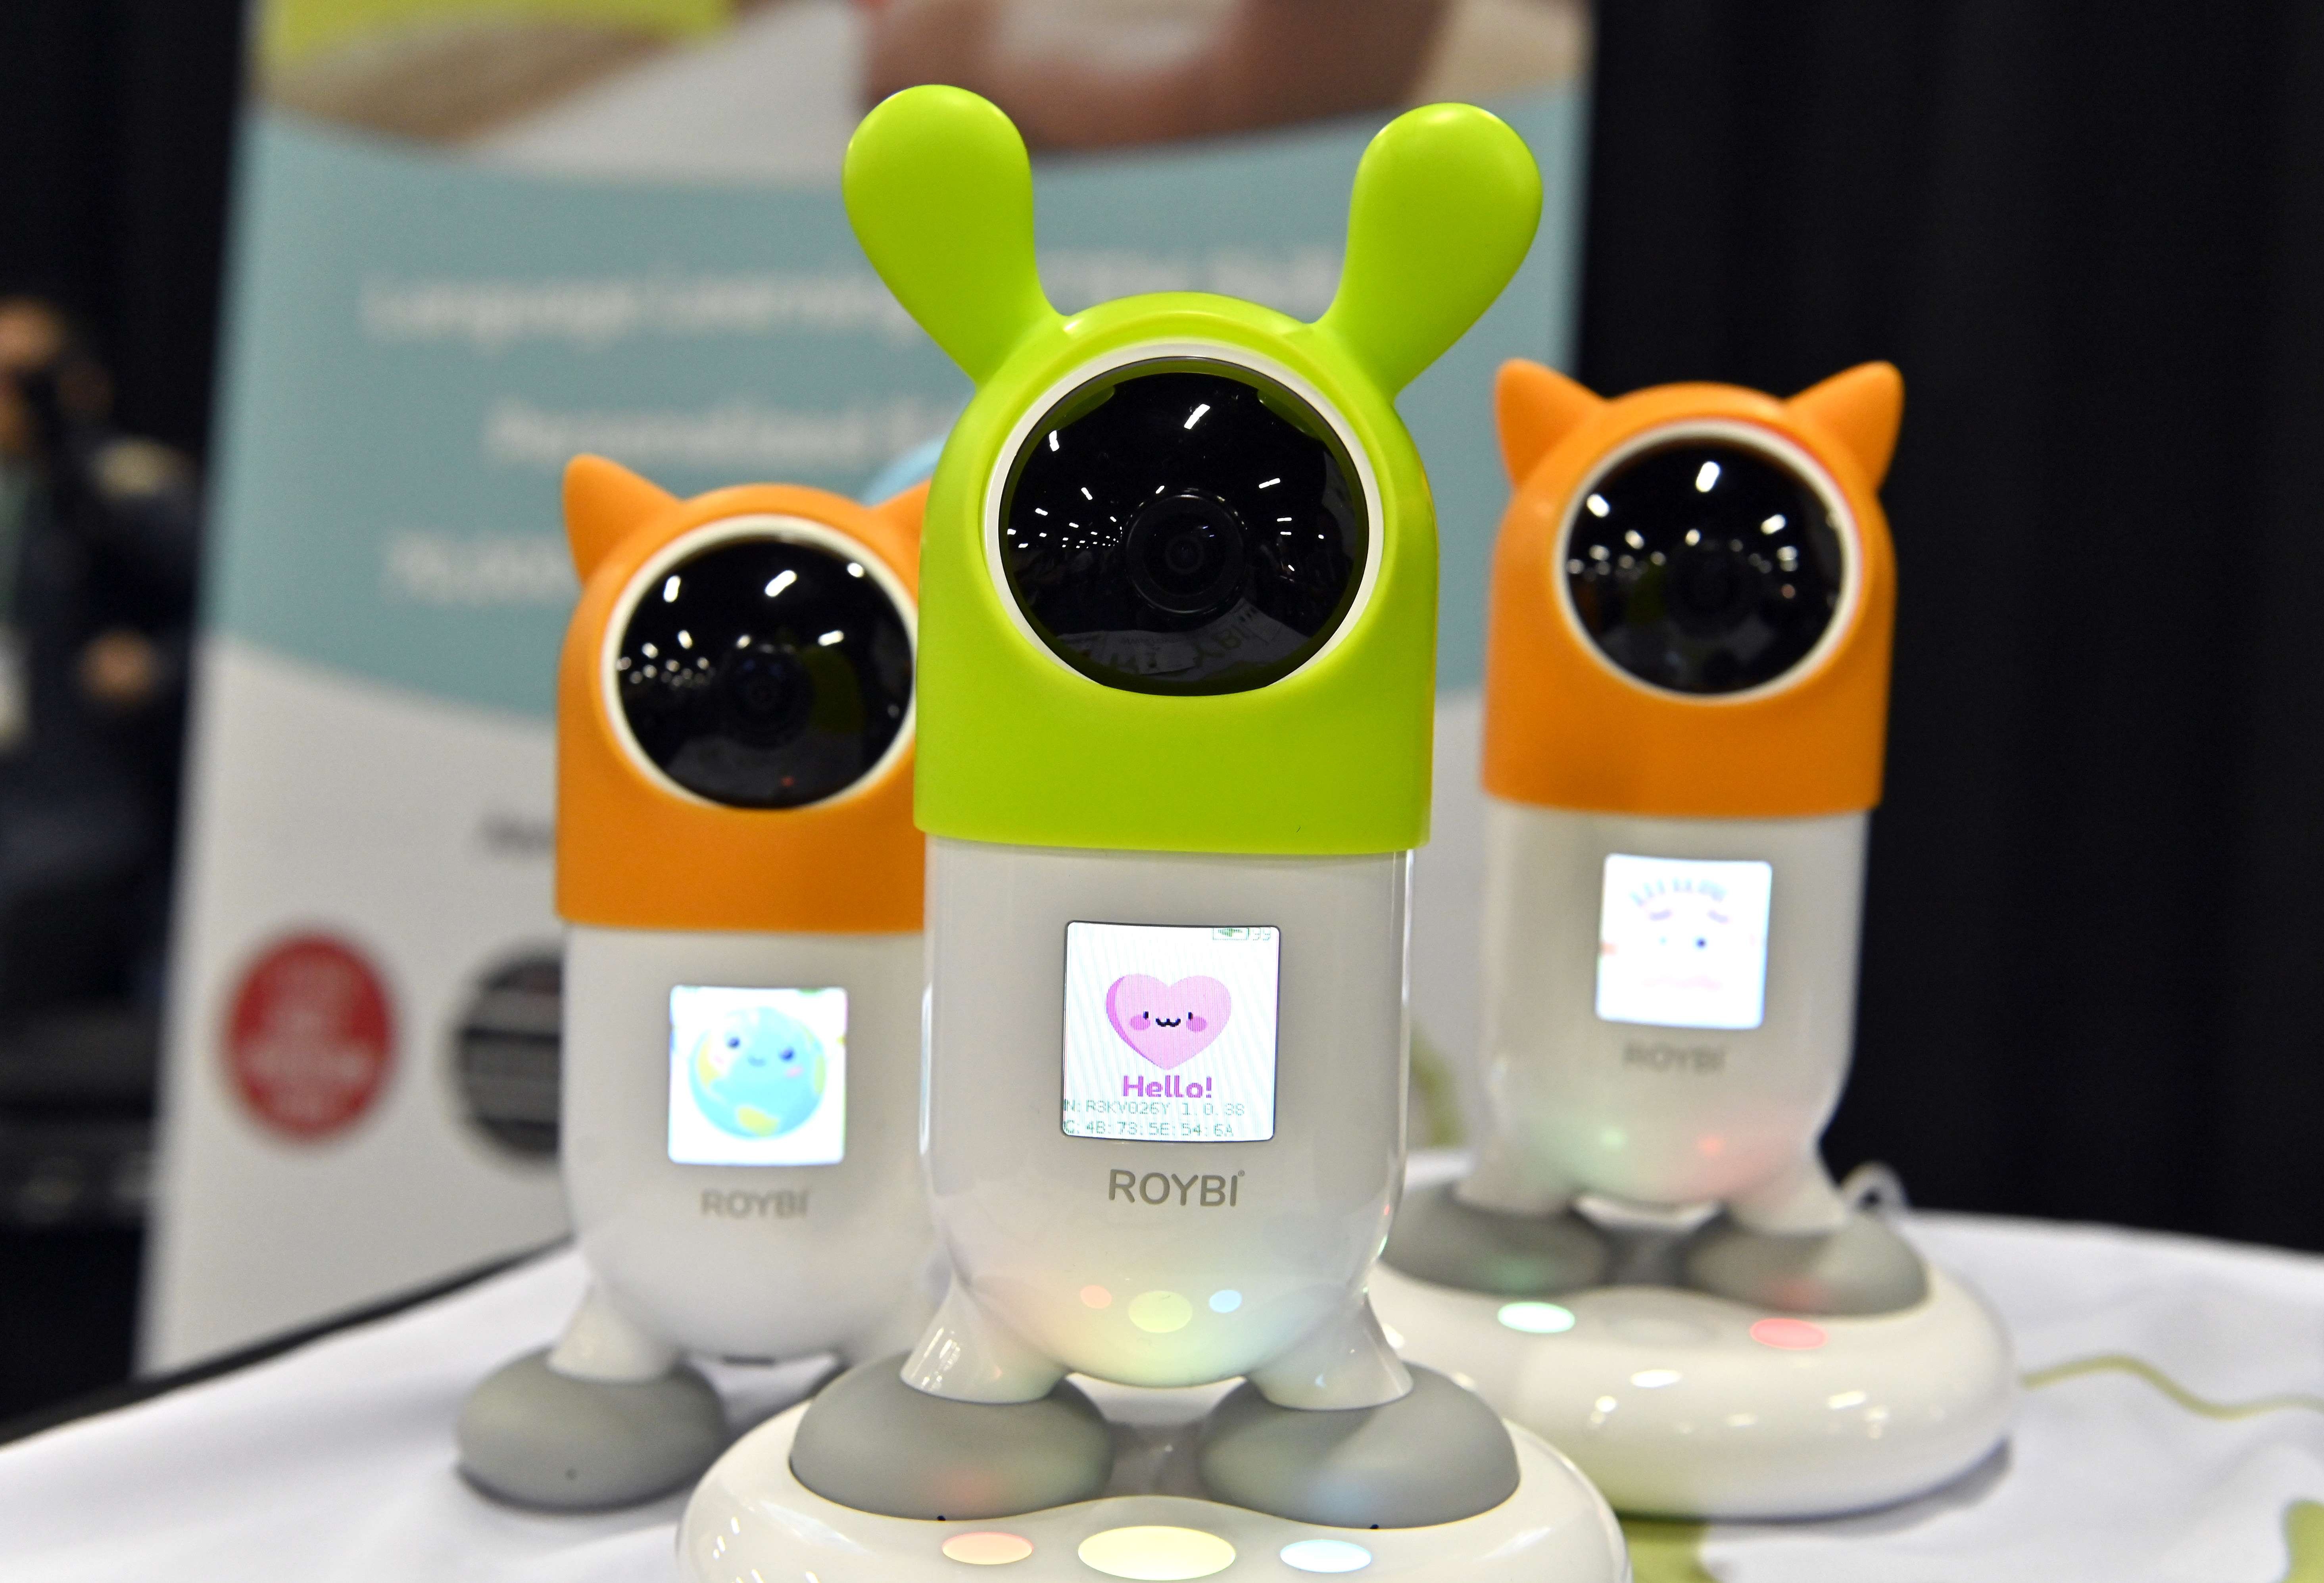 Roybi robots are displayed at the Roybi booth during a press event for CES 2020 at the Mandalay Bay Convention Centre on January 5 in Las Vegas. Photo: Agence France-Presse